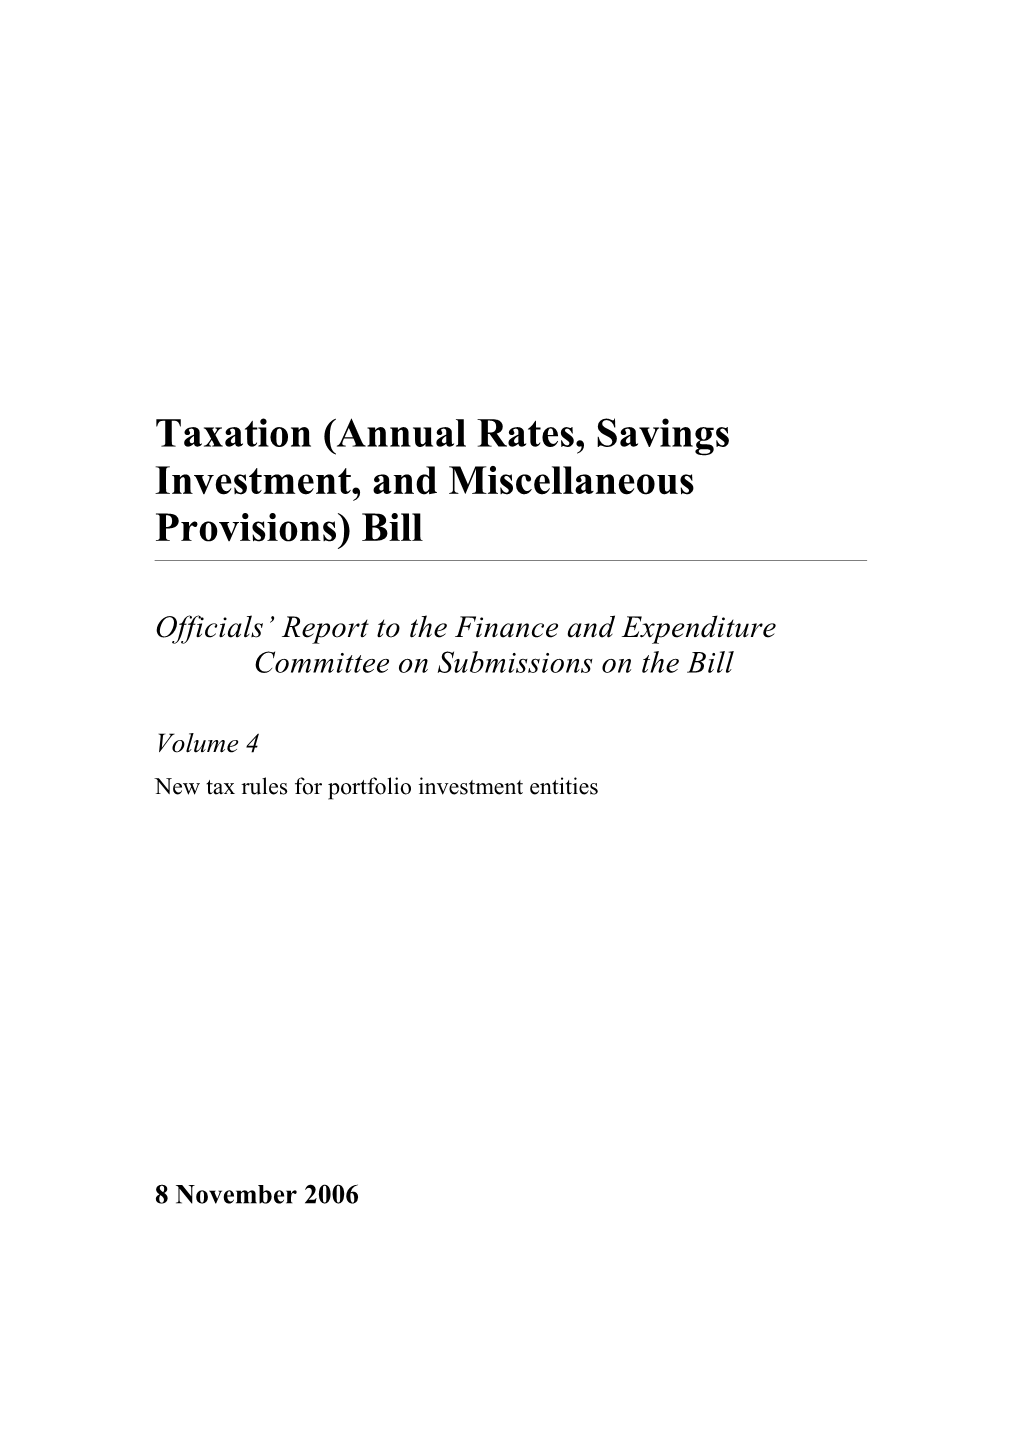 Taxation (Annual Rates, Savings Investment, and Miscellaneous Provisions) Bill: Officials'